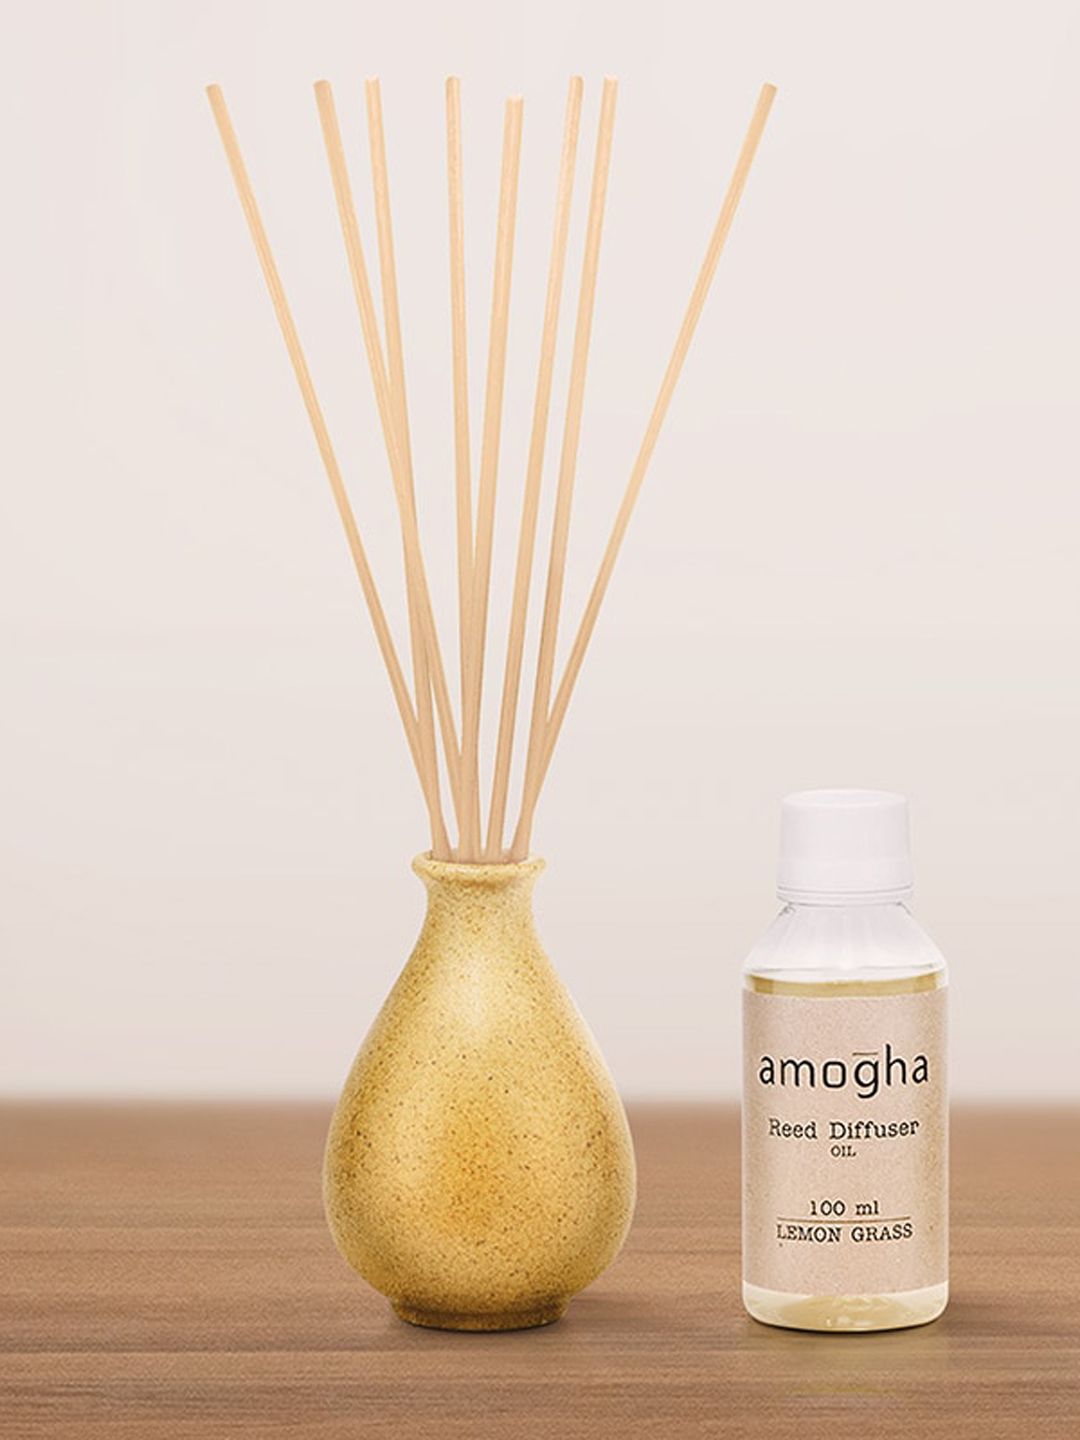 Iris Yellow & Gold-Toned Reed Diffuser Set Price in India